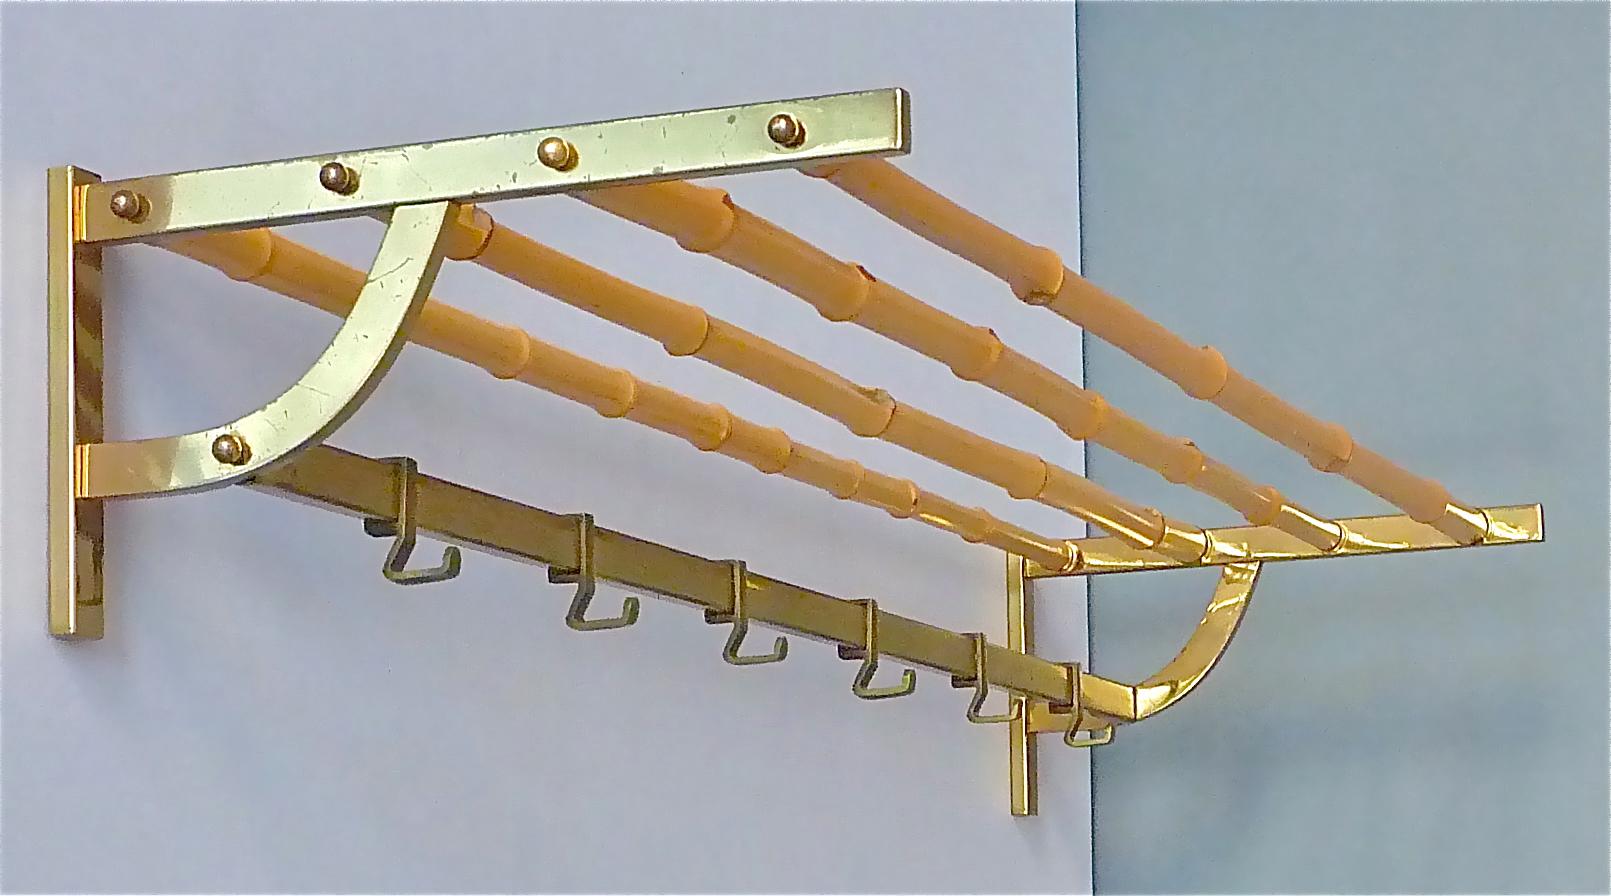 Extra large stunning and exceptional modernist coat rack or wall wardrobe, which has been designed and executed in the 1950s in Austria, probably it belongs to one of the wonderful designs by Auböck, Hagenauer, Josef Frank for Haus & Garten or